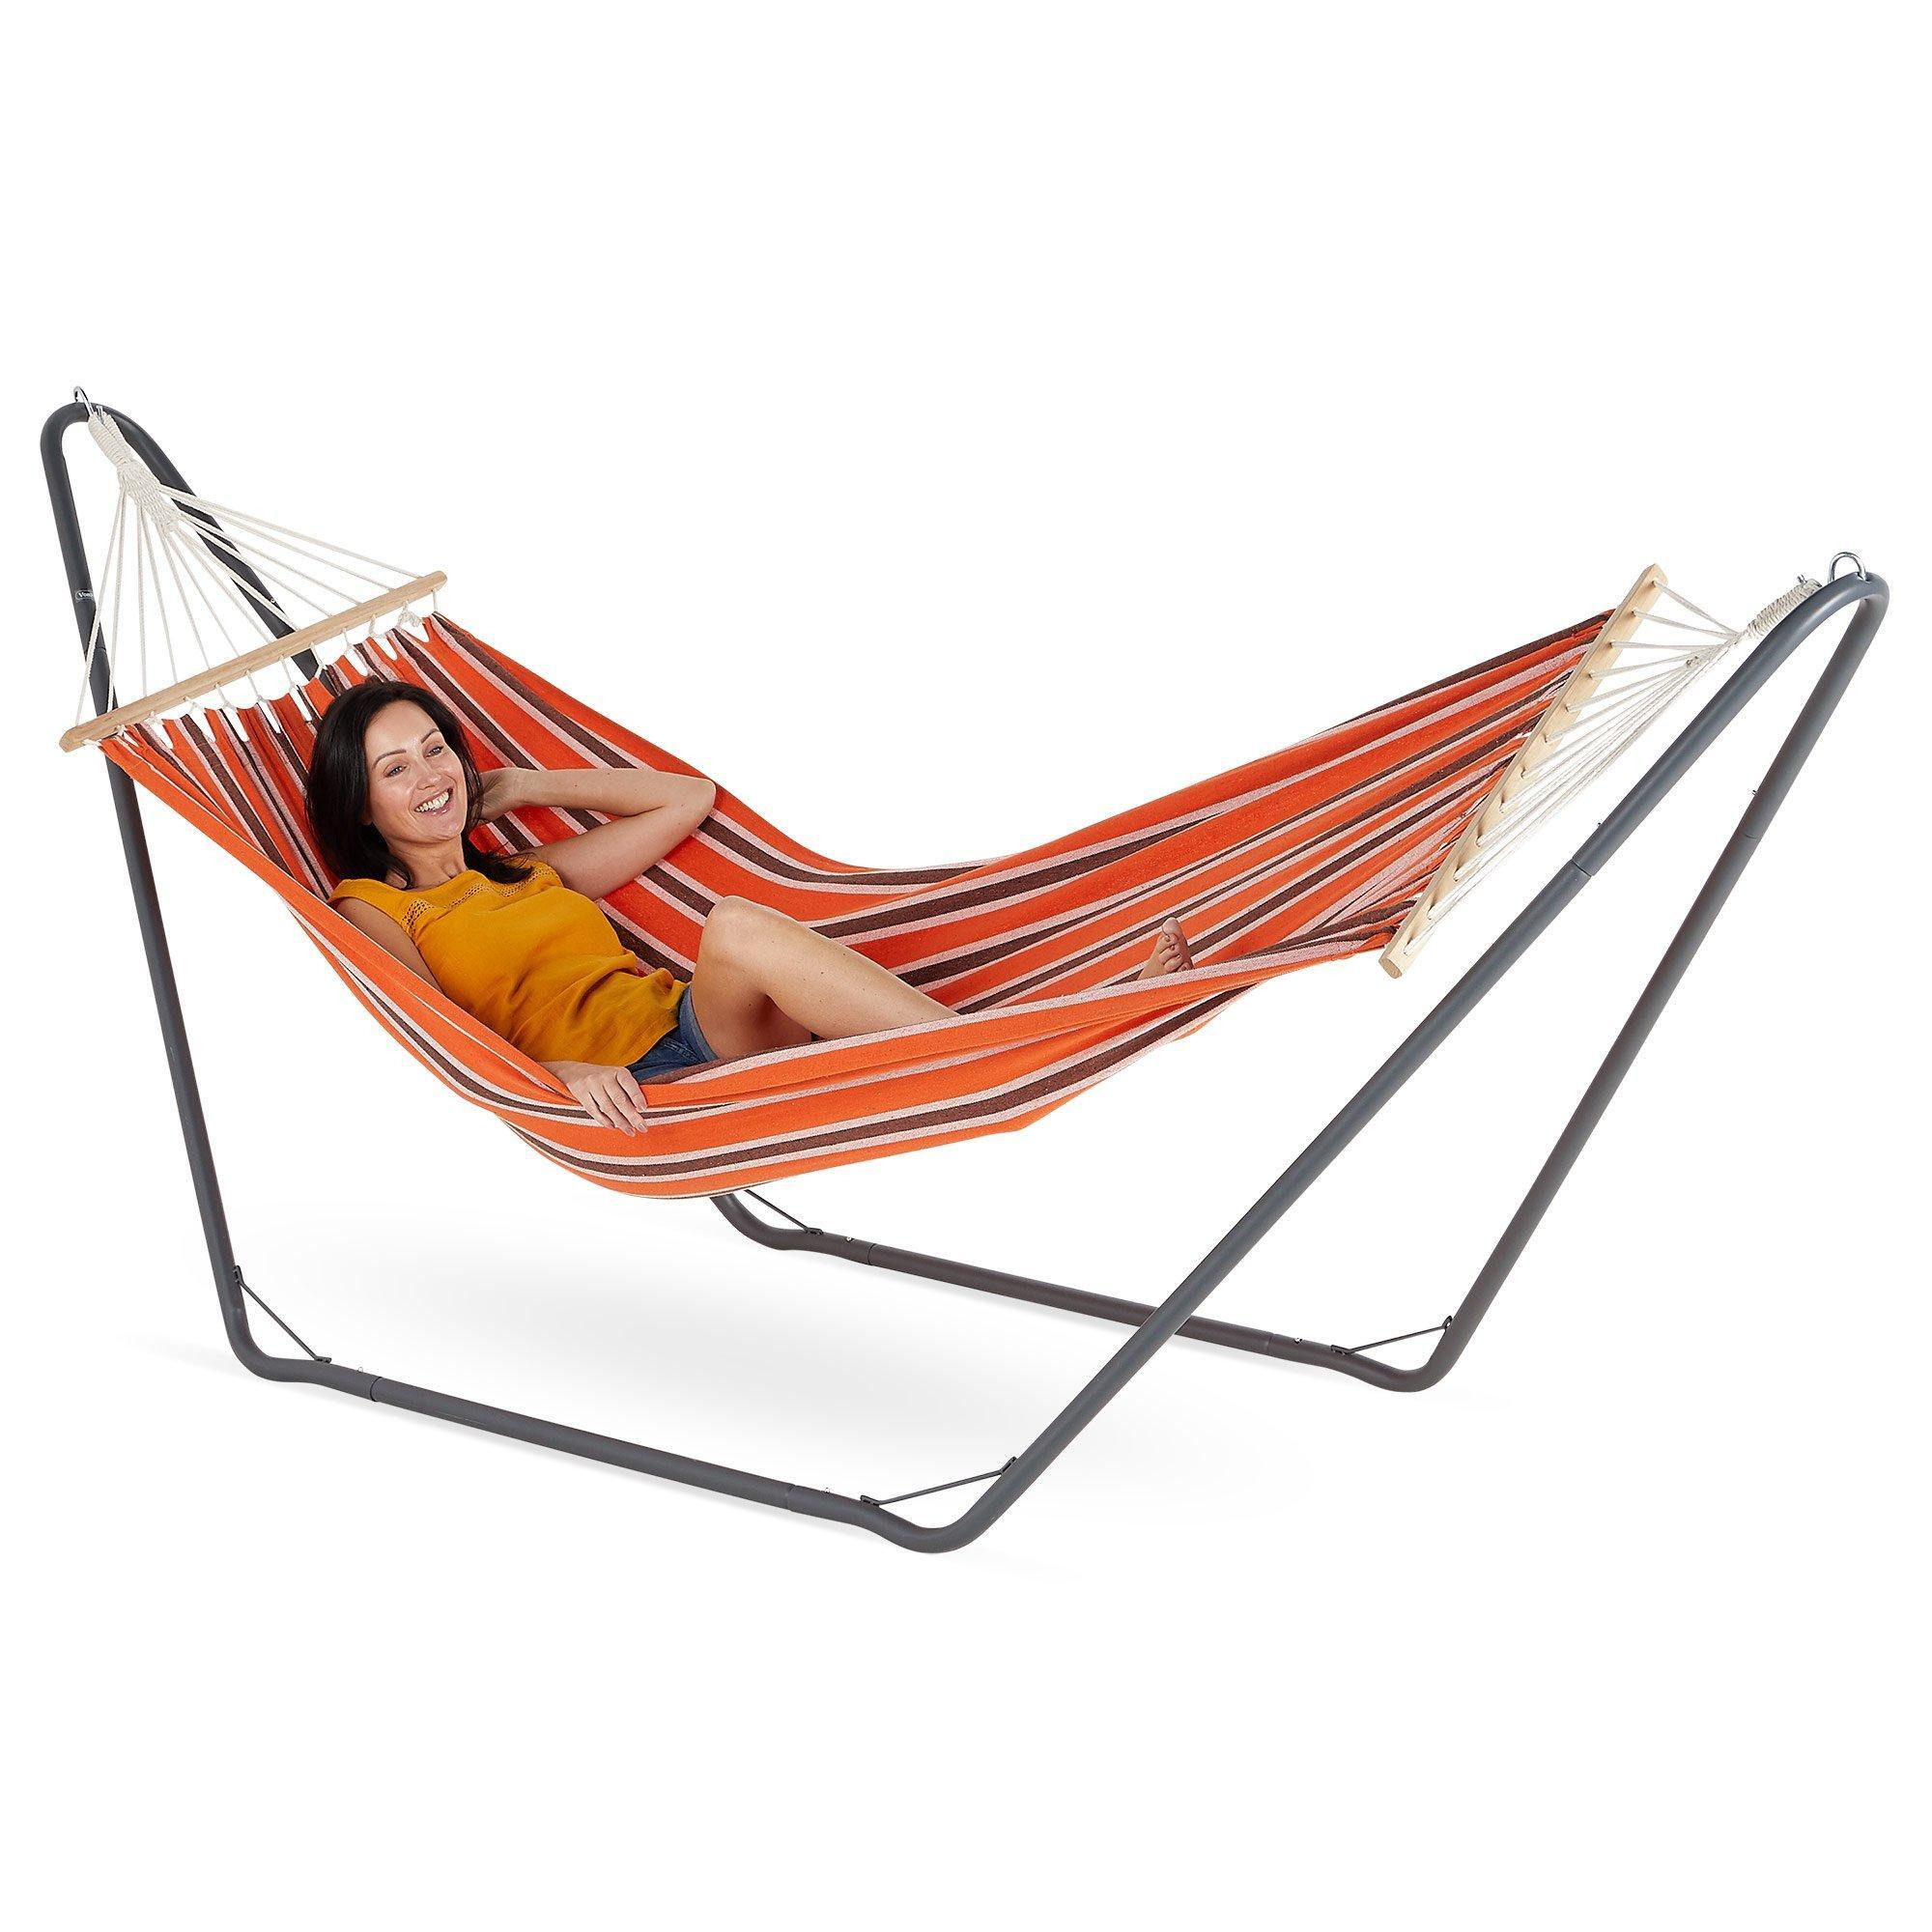 1 Person Striped Freestanding Garden Hammock with Frame - image 1